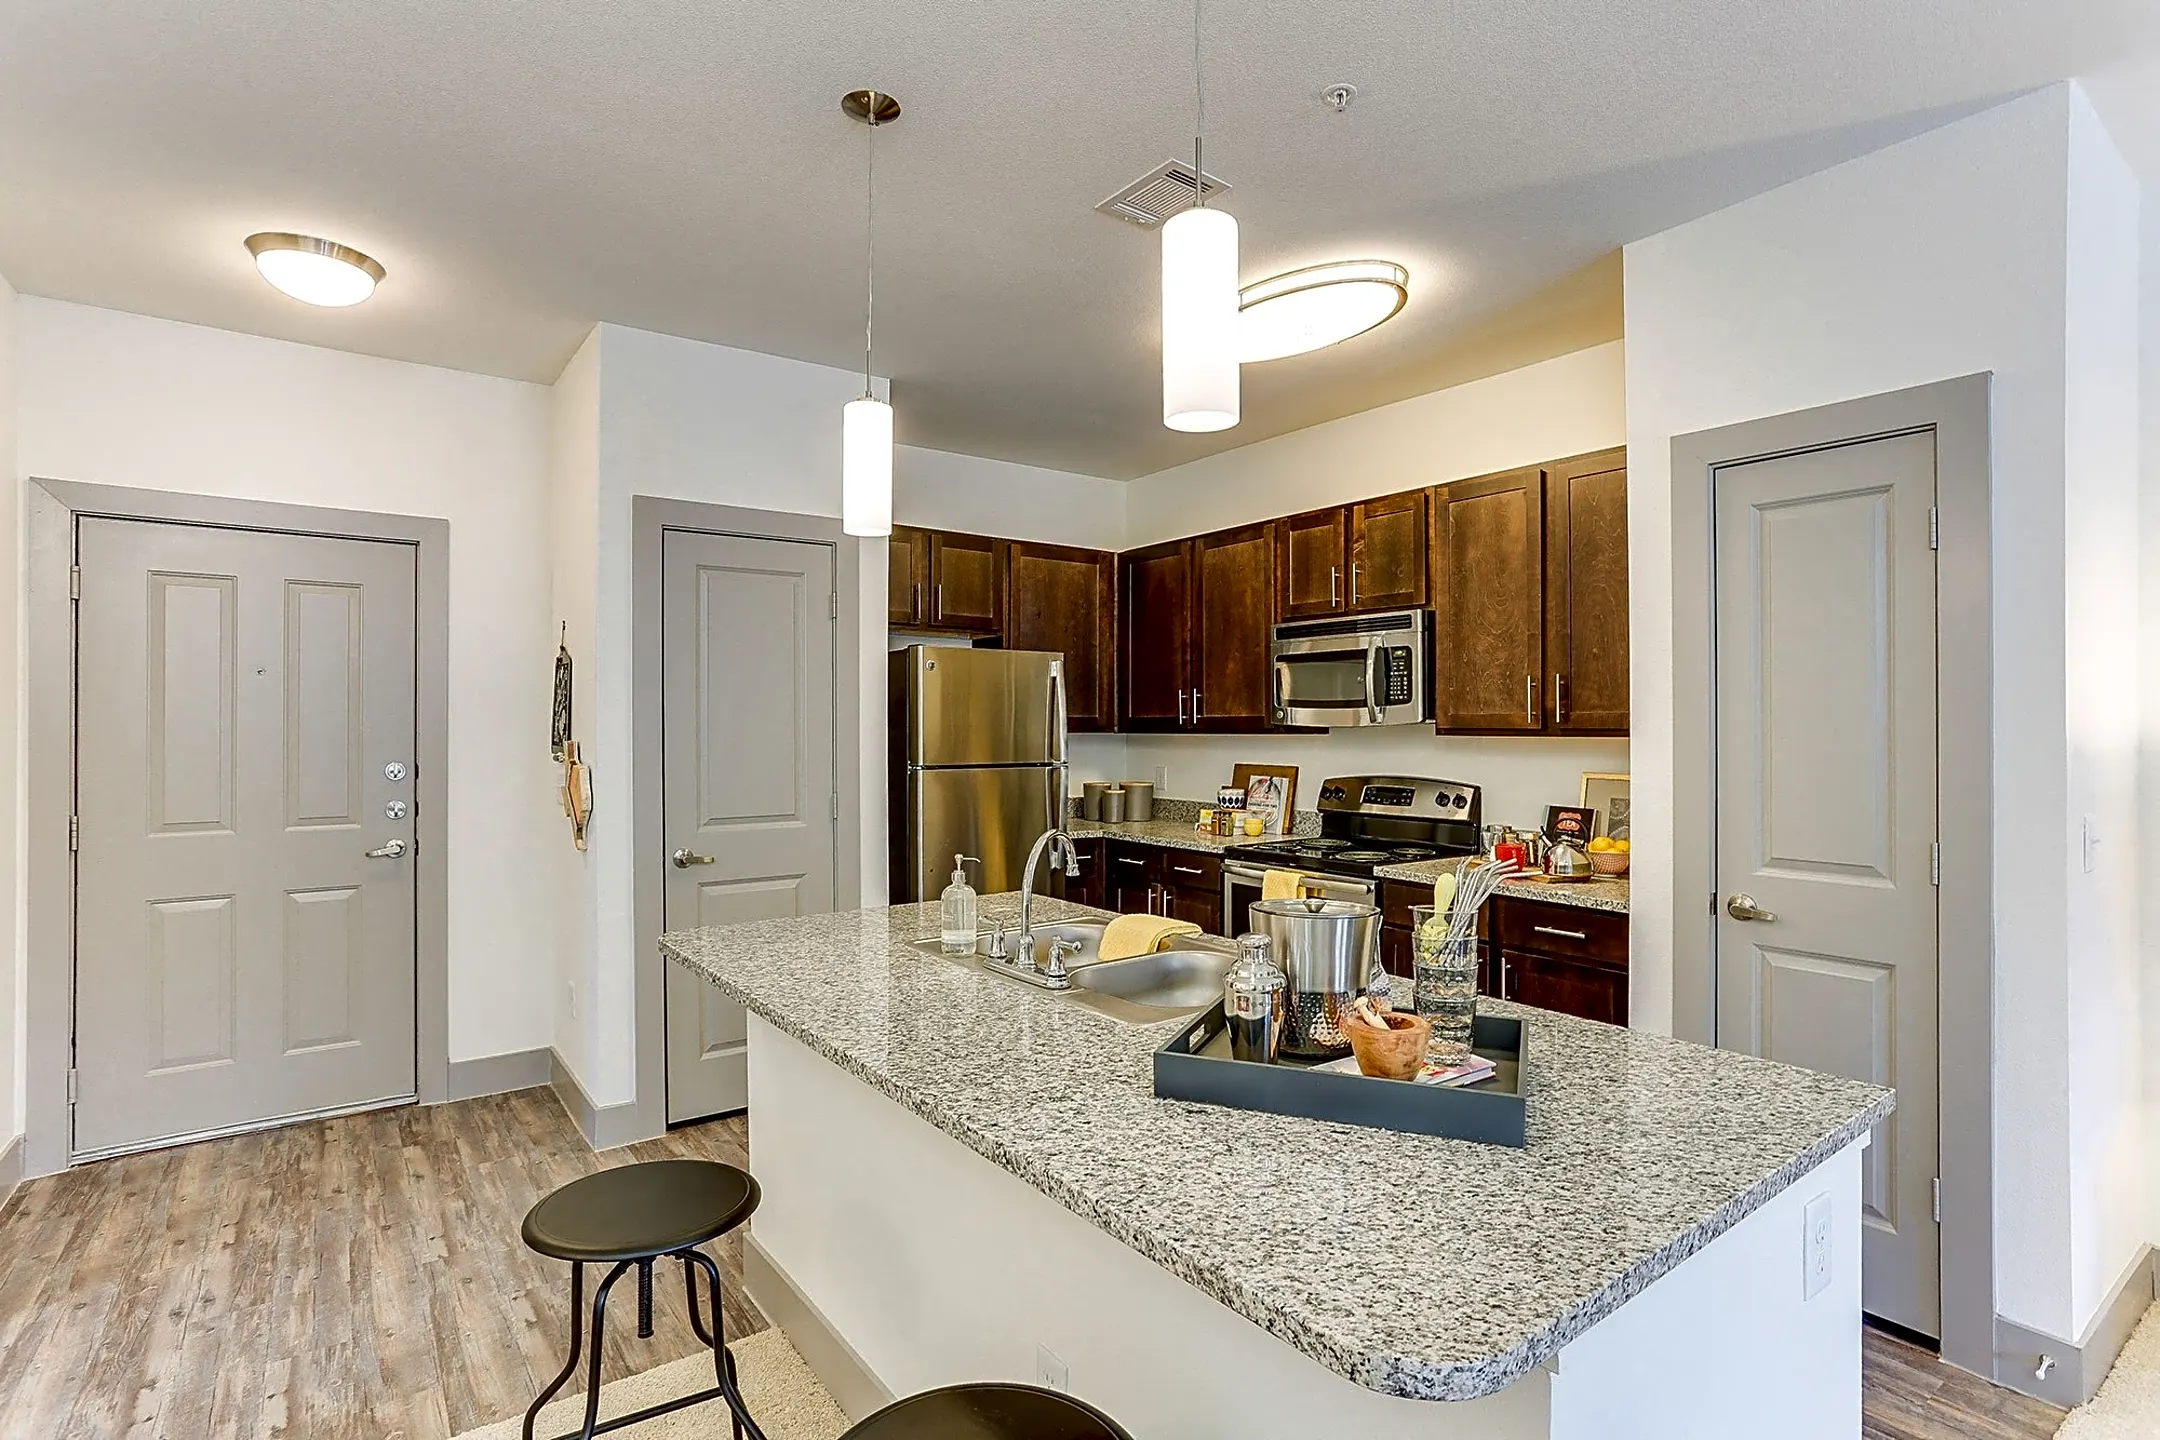 Kitchen - The Bend at Crescent Pointe - College Station, TX